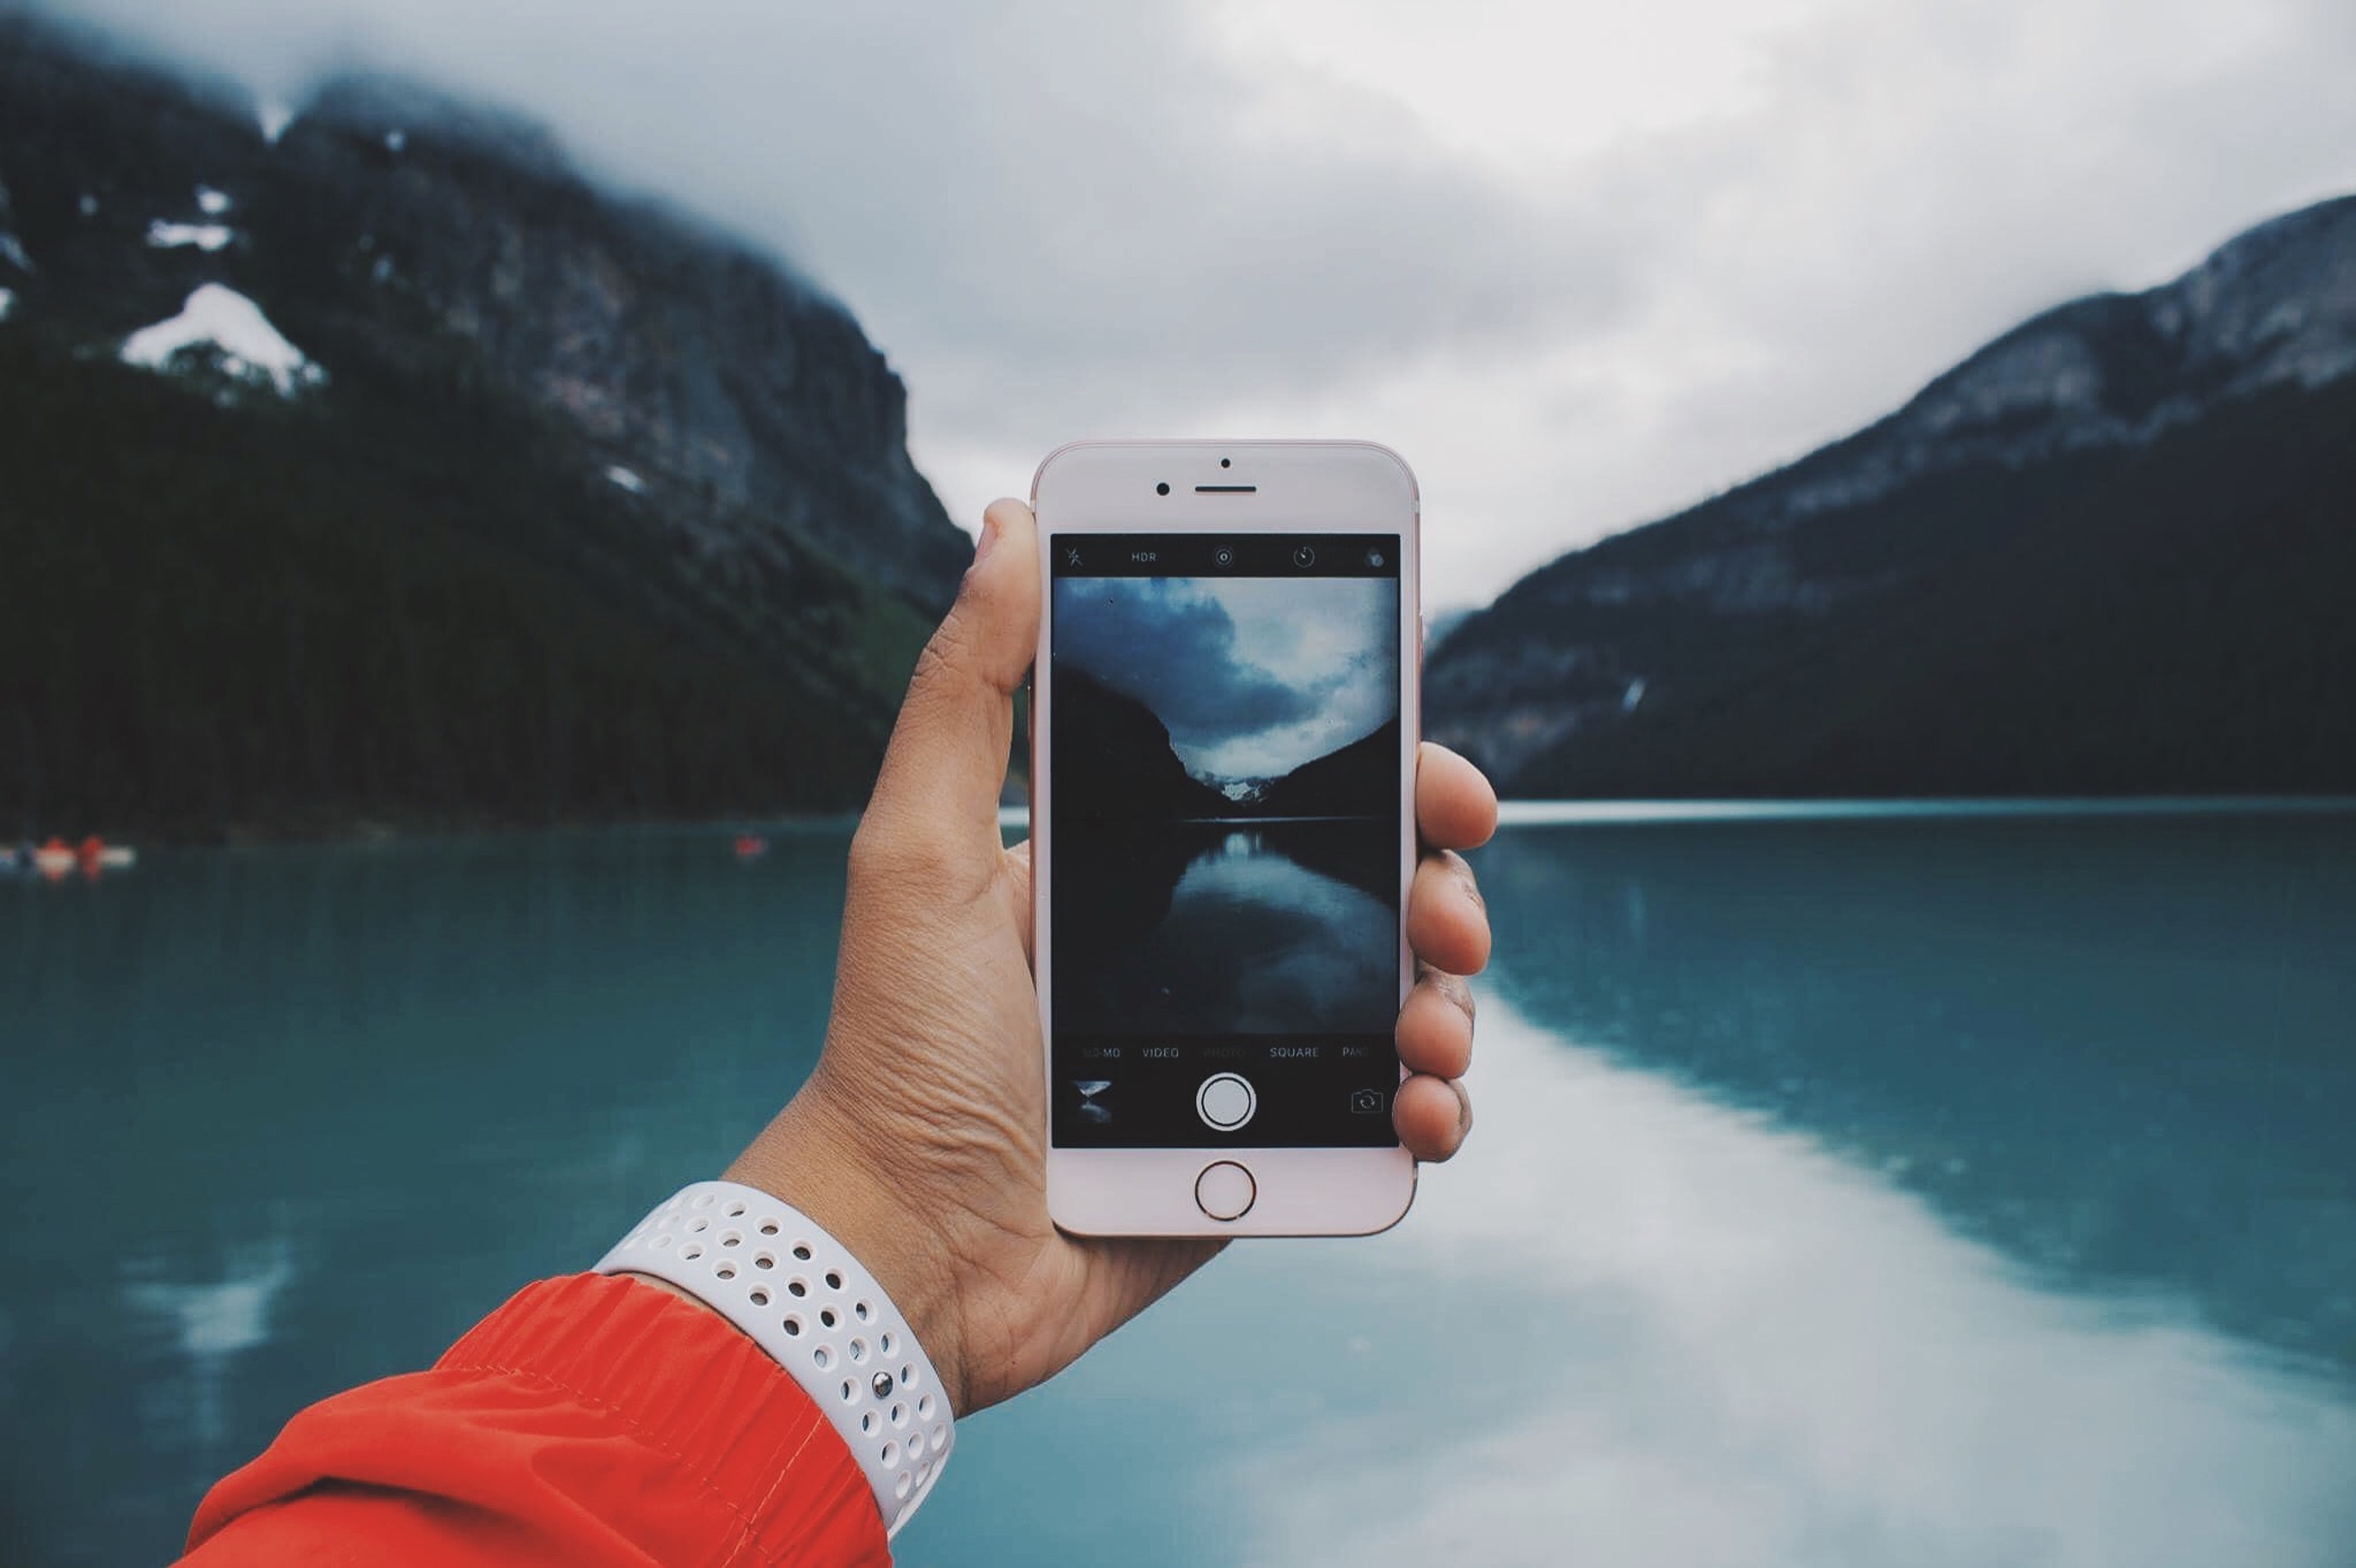 The 6 Best Photo Editing Apps For iPhone in 2019